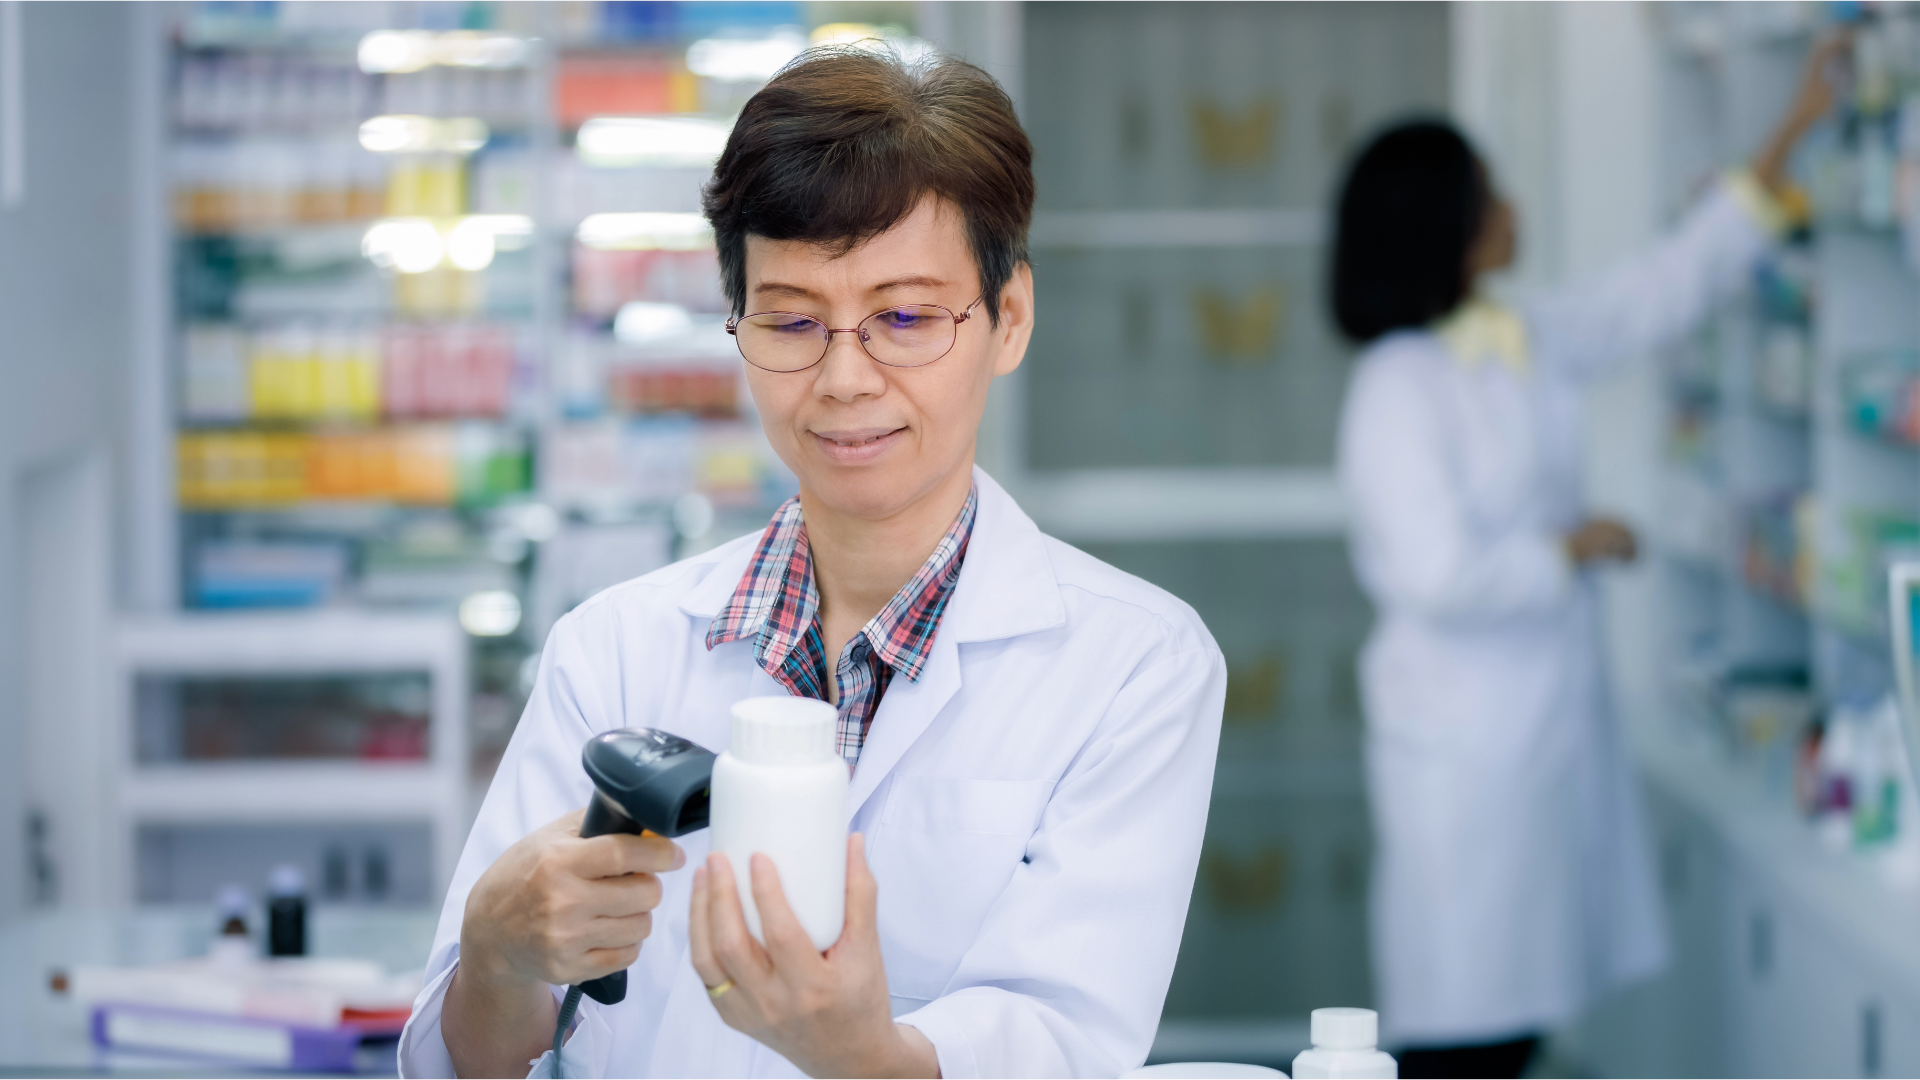 A pharmacy professional scans a medication stock bottle.